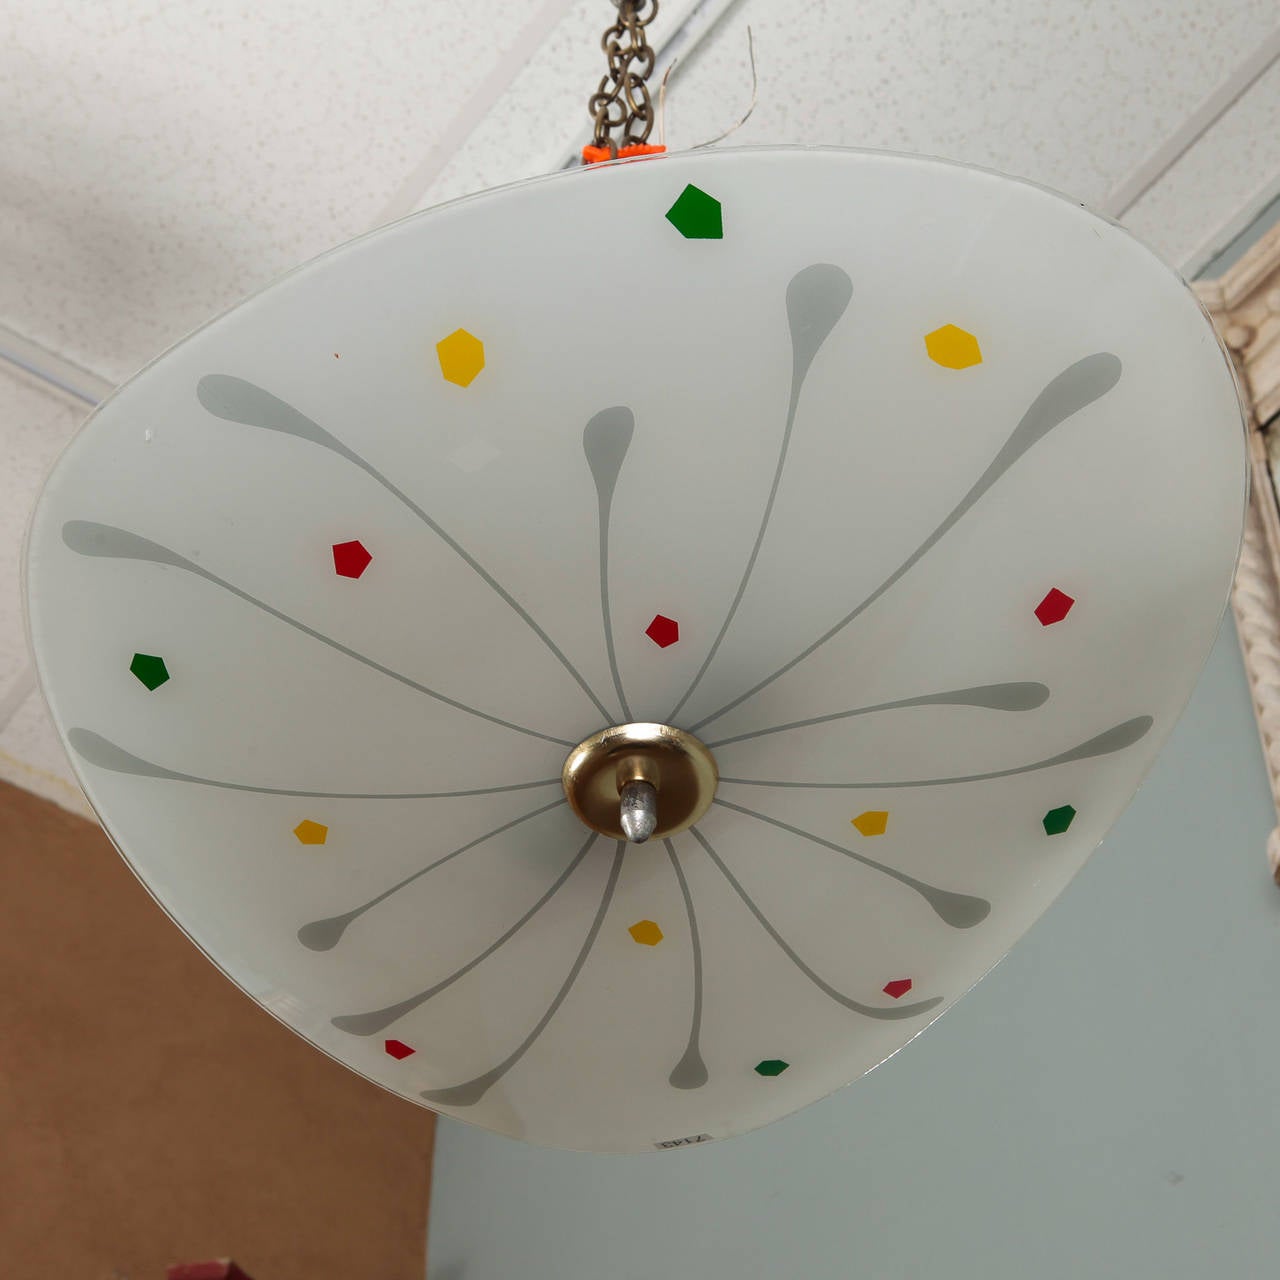 Circa 1980s German light fixture with op art styling in white satin glass with a whimsical gray and multi color design. White ceiling canopy and new electrical wiring for US standards.